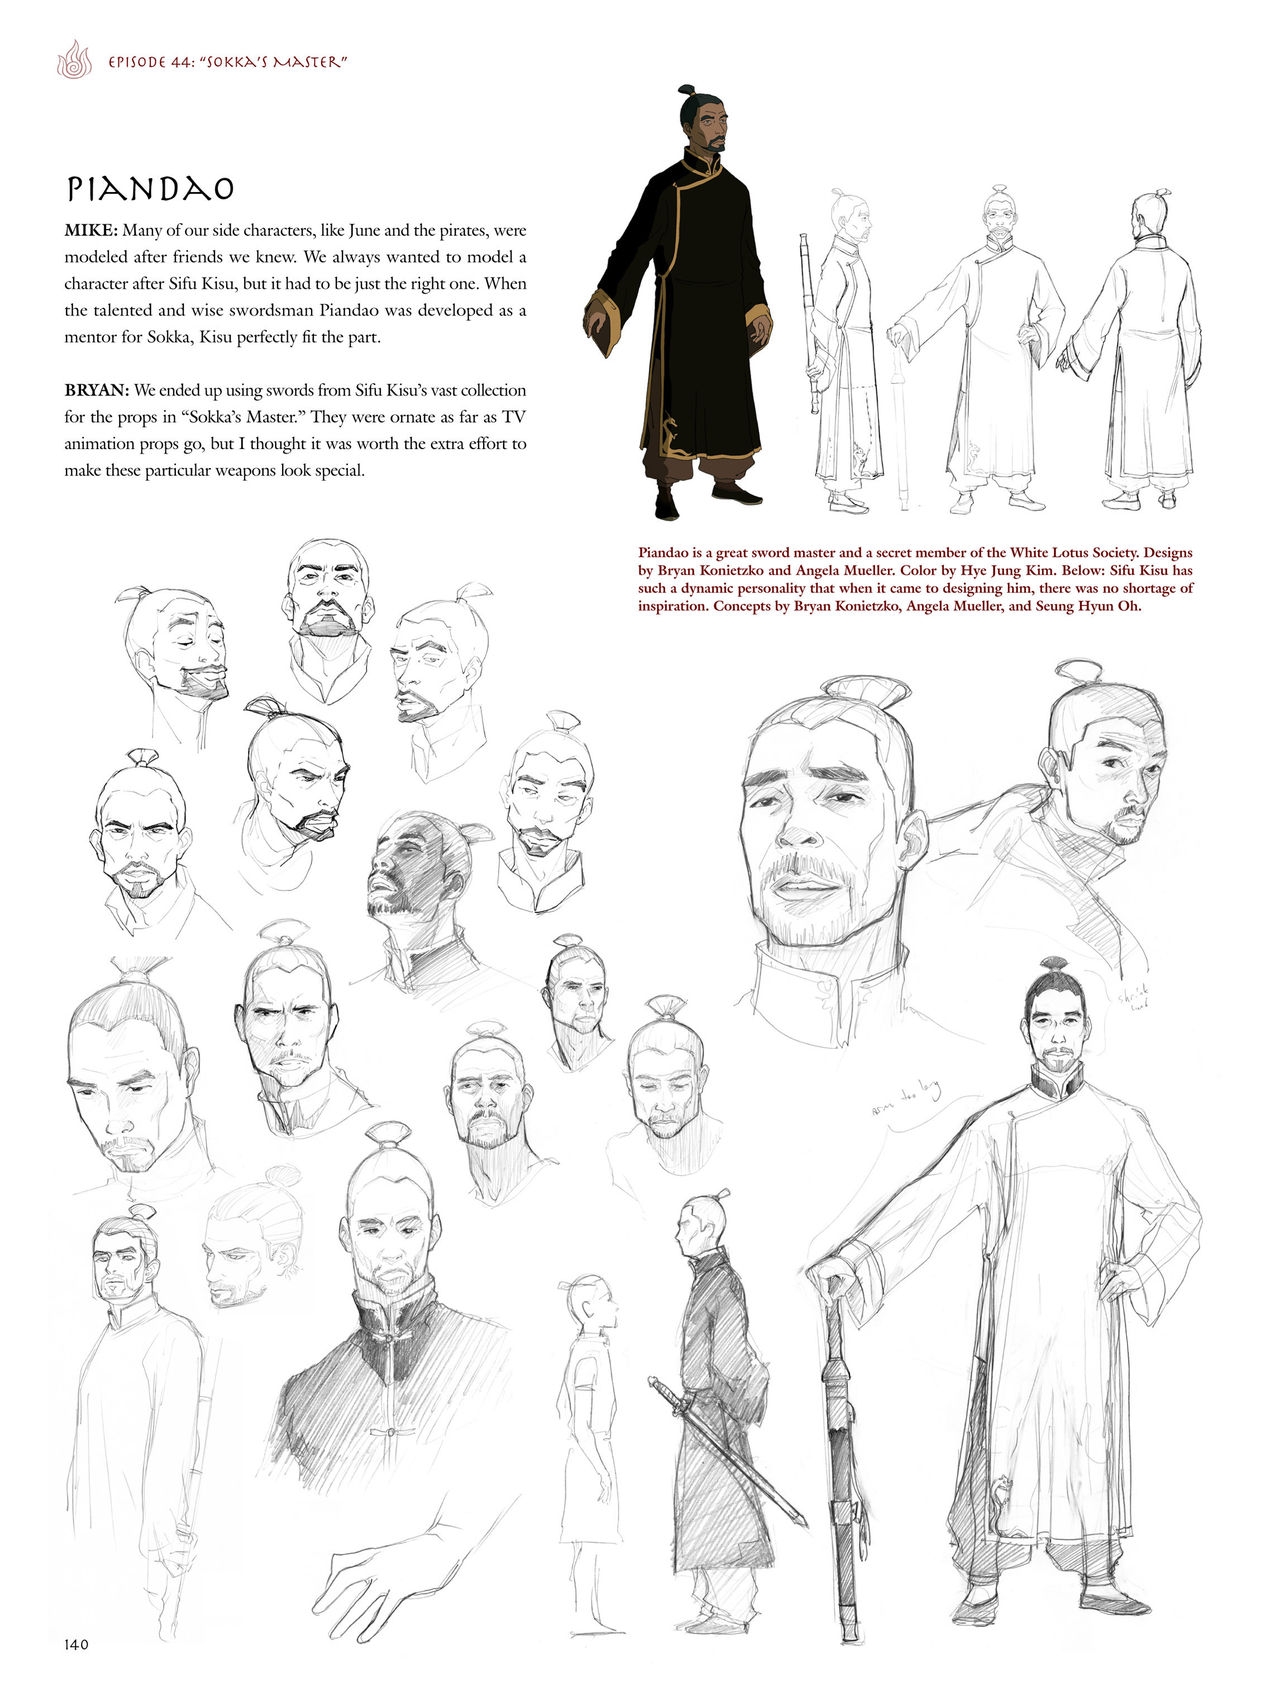 Avatar - The Last Airbender - The Art of the Animated Series 136